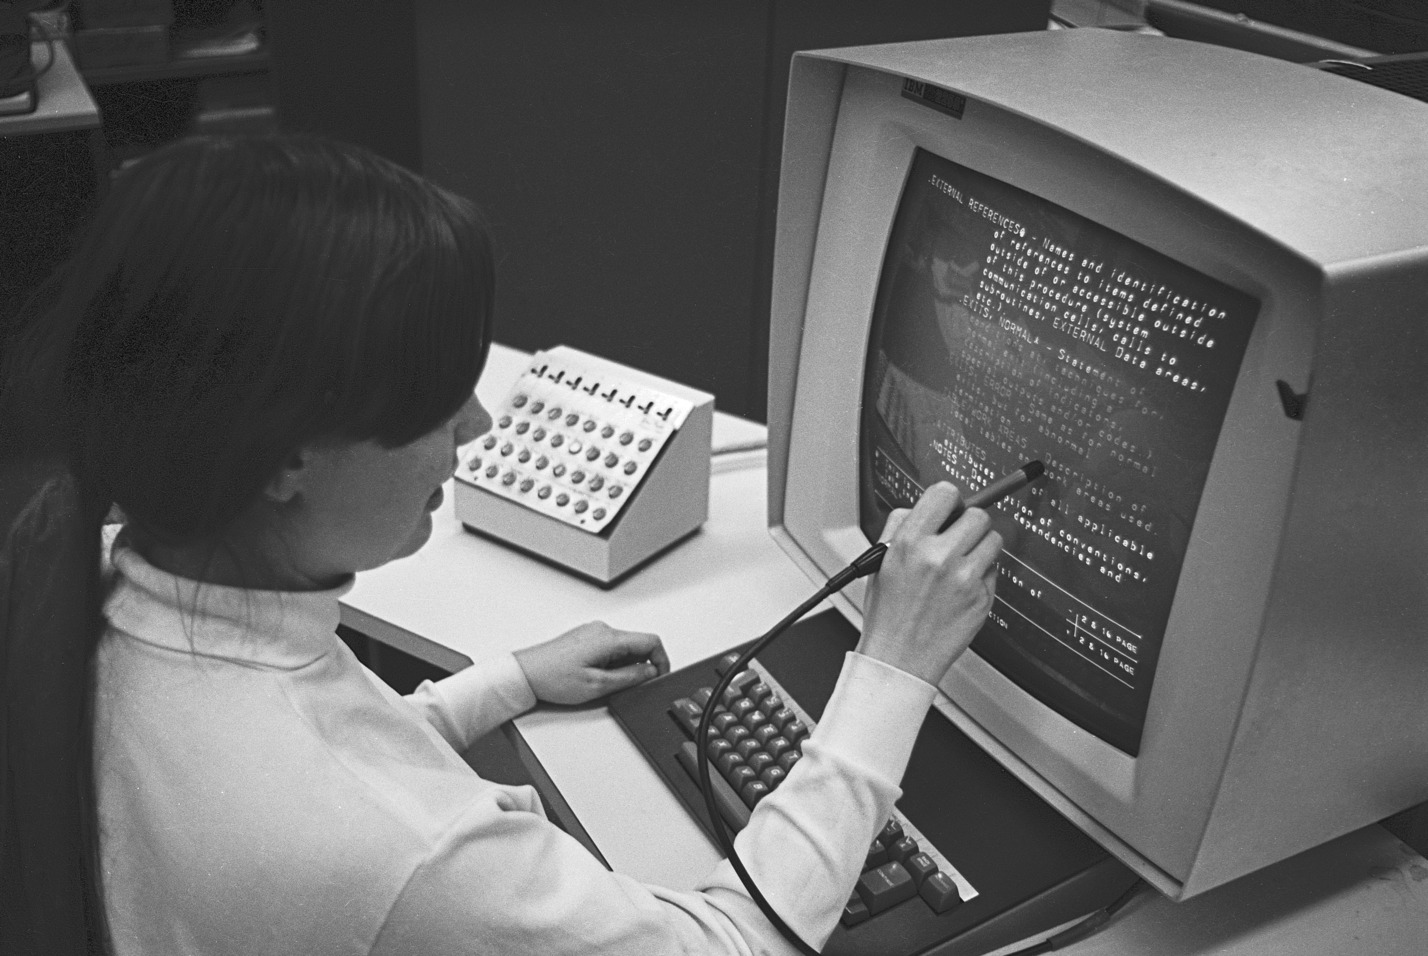 A computer operator using a hypertext editing system in 1969Gregory Lloyd from Wikipedia, CC BY 2.0.